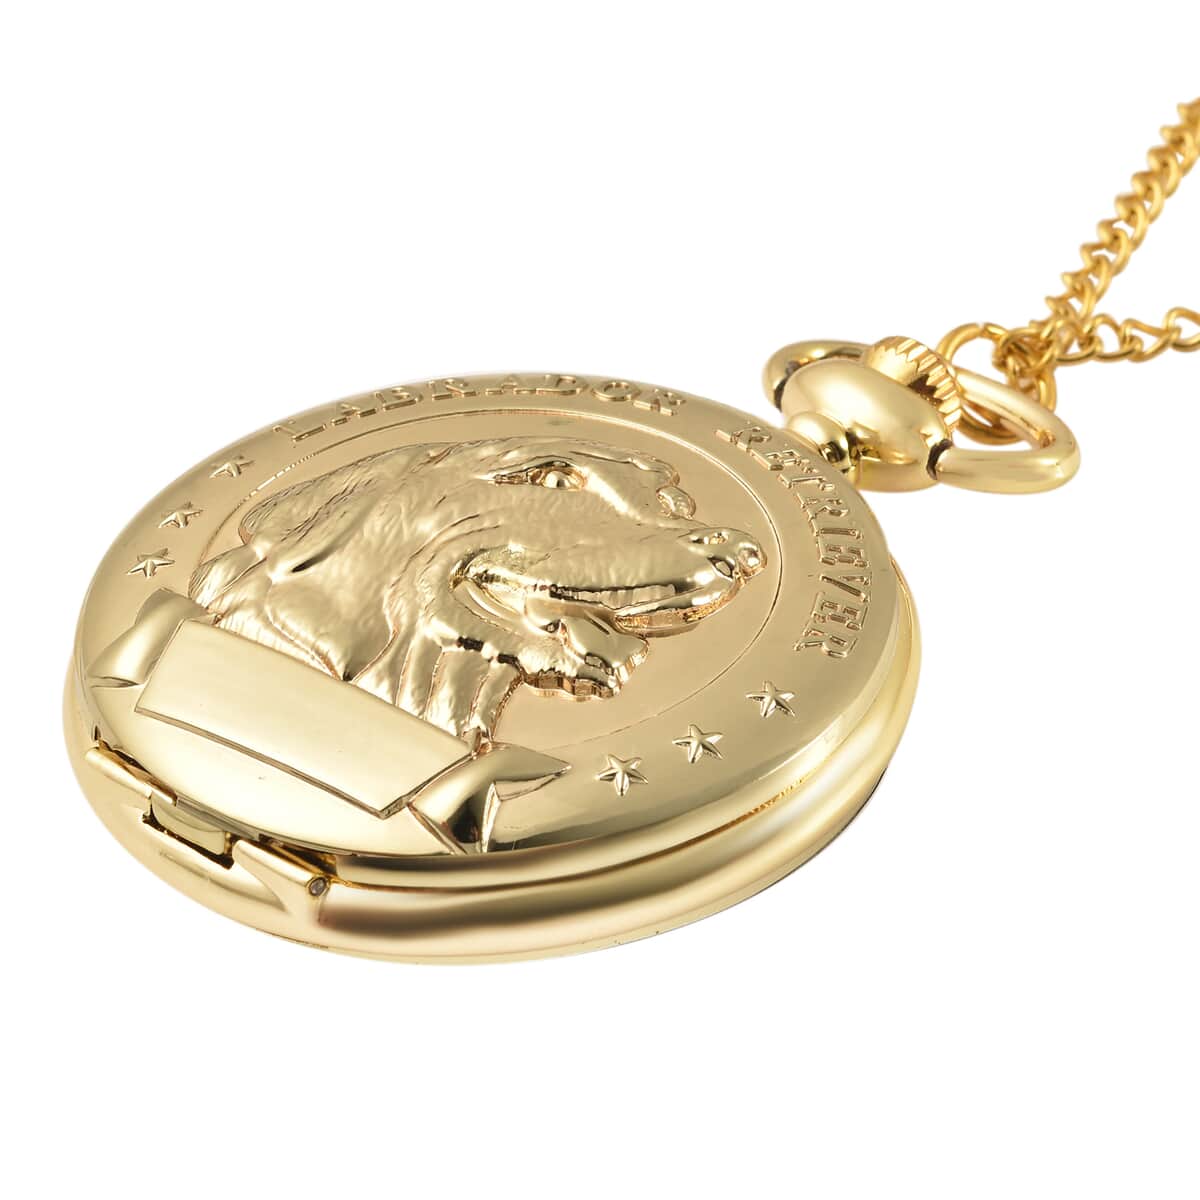 Strada Japanese Movement Labrador Pocket Watch in Goldtone with Chain (31 Inches) image number 2